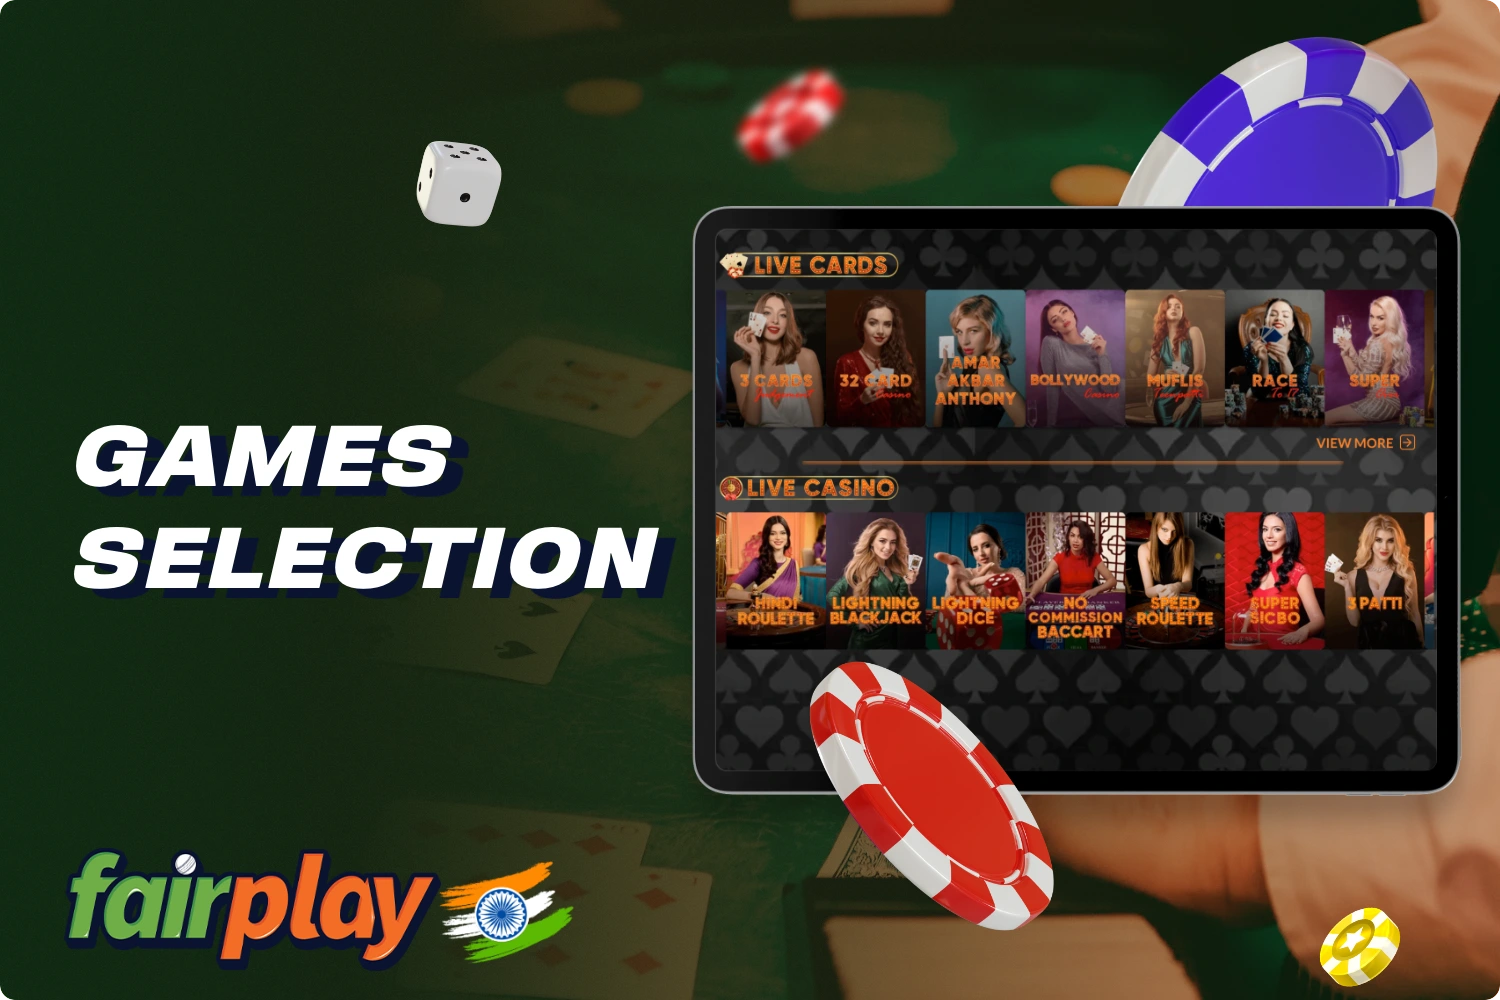 Fairplay offers hundreds of different games to gamblers